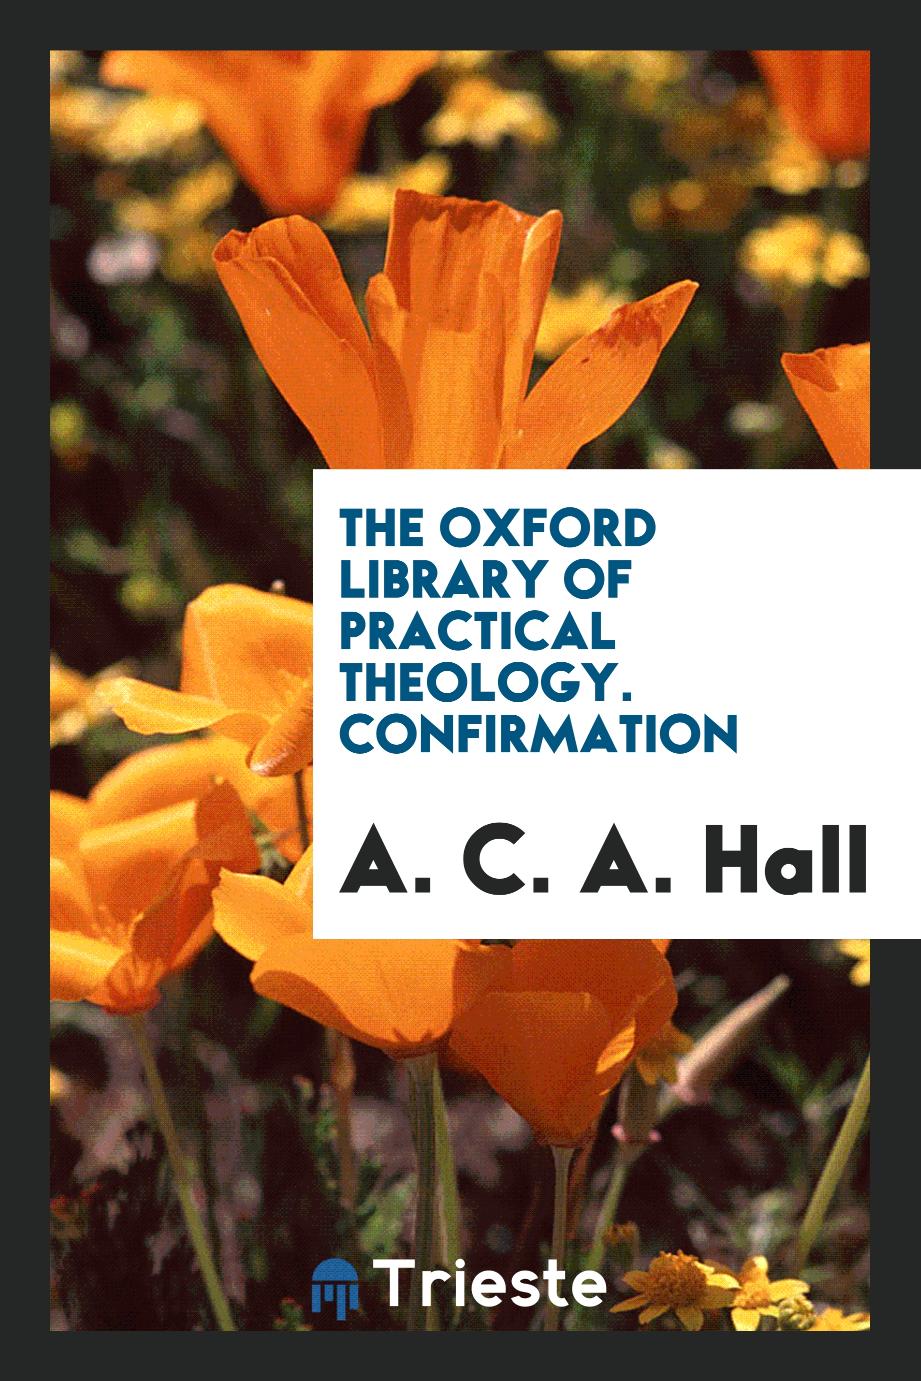 The Oxford Library of Practical Theology. Confirmation